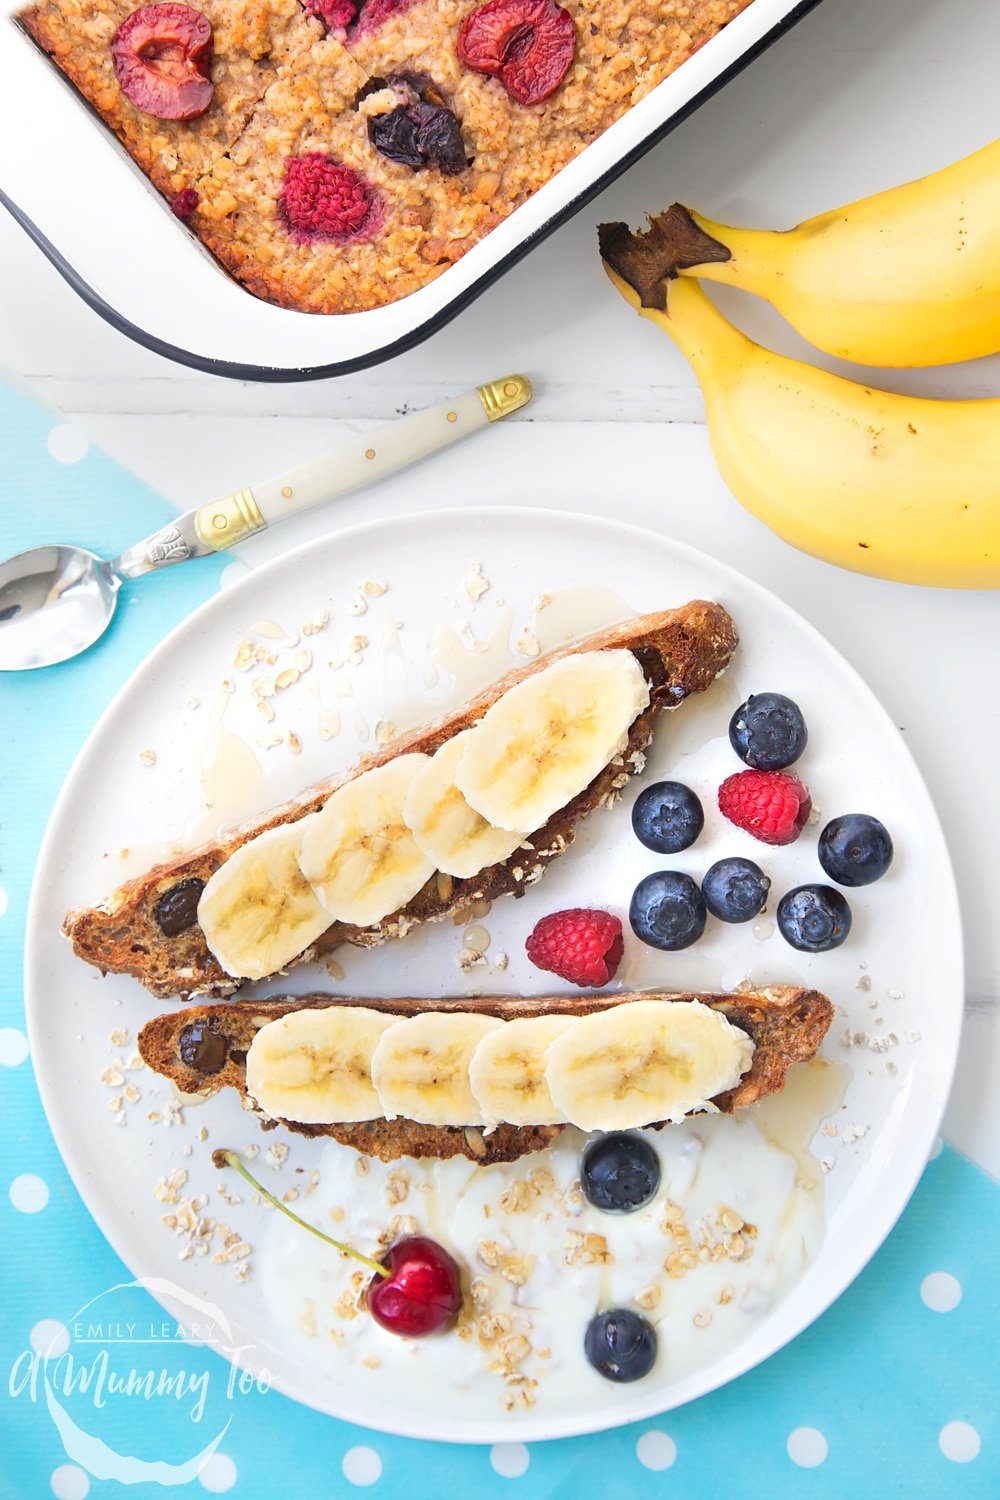 Easy, delicious homemade fruit loaf featuring summer berries - shown here toasted and topped with summer fruits and bananas